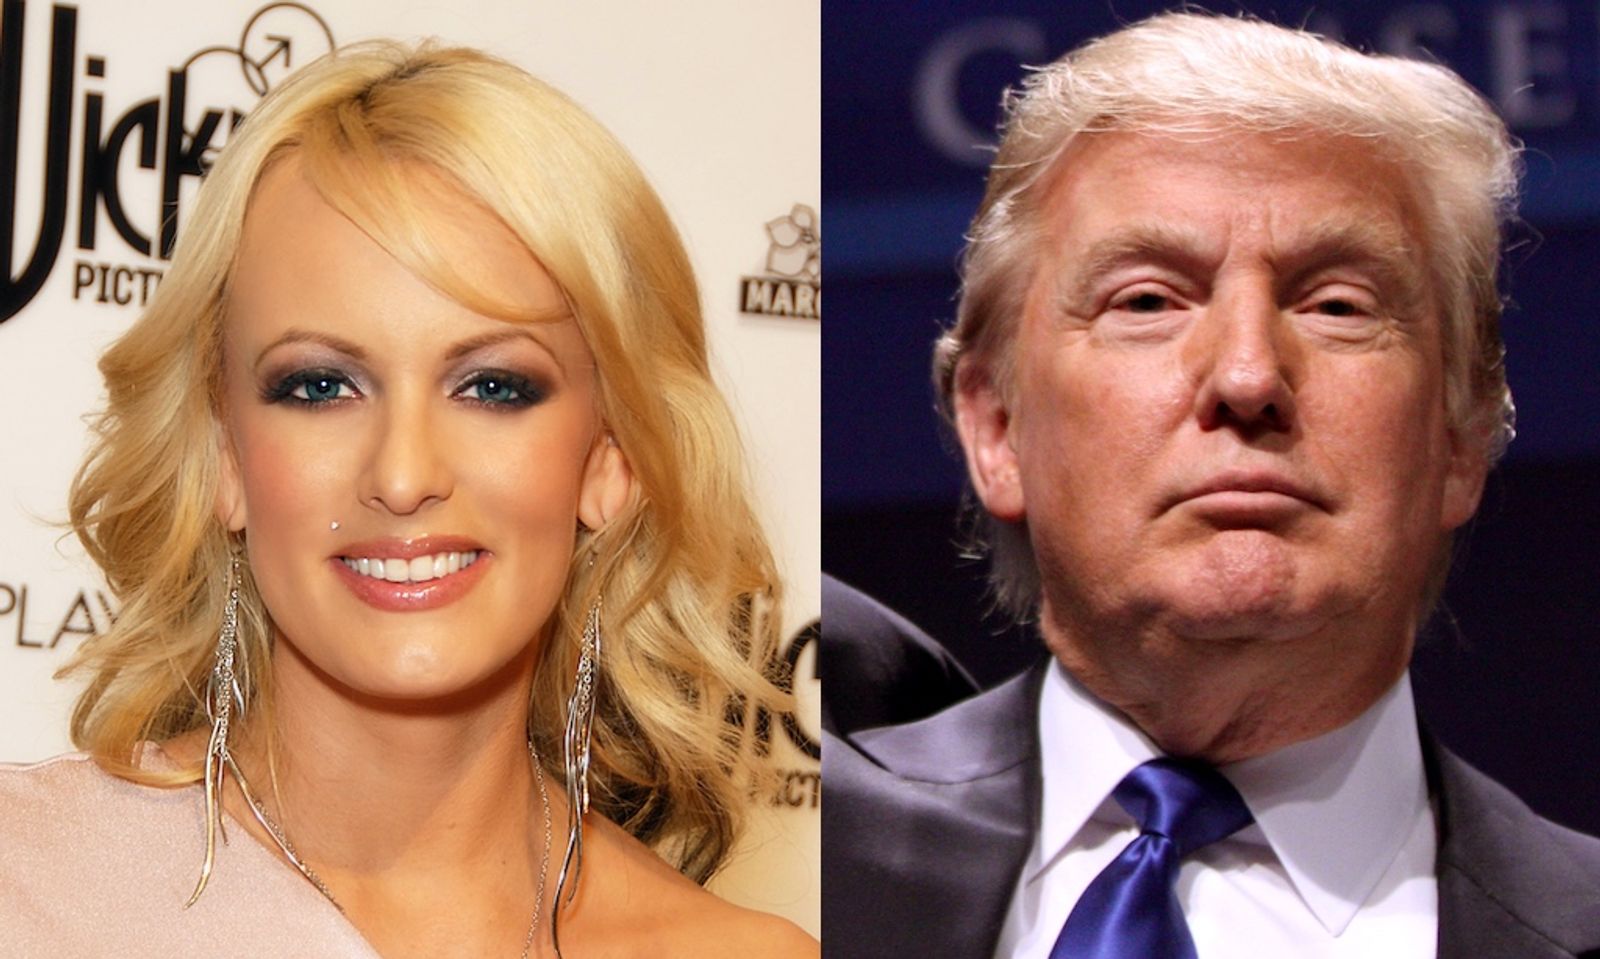 Stormy Daniels Case Forces Donald Trump to SCOTUS Over Taxes